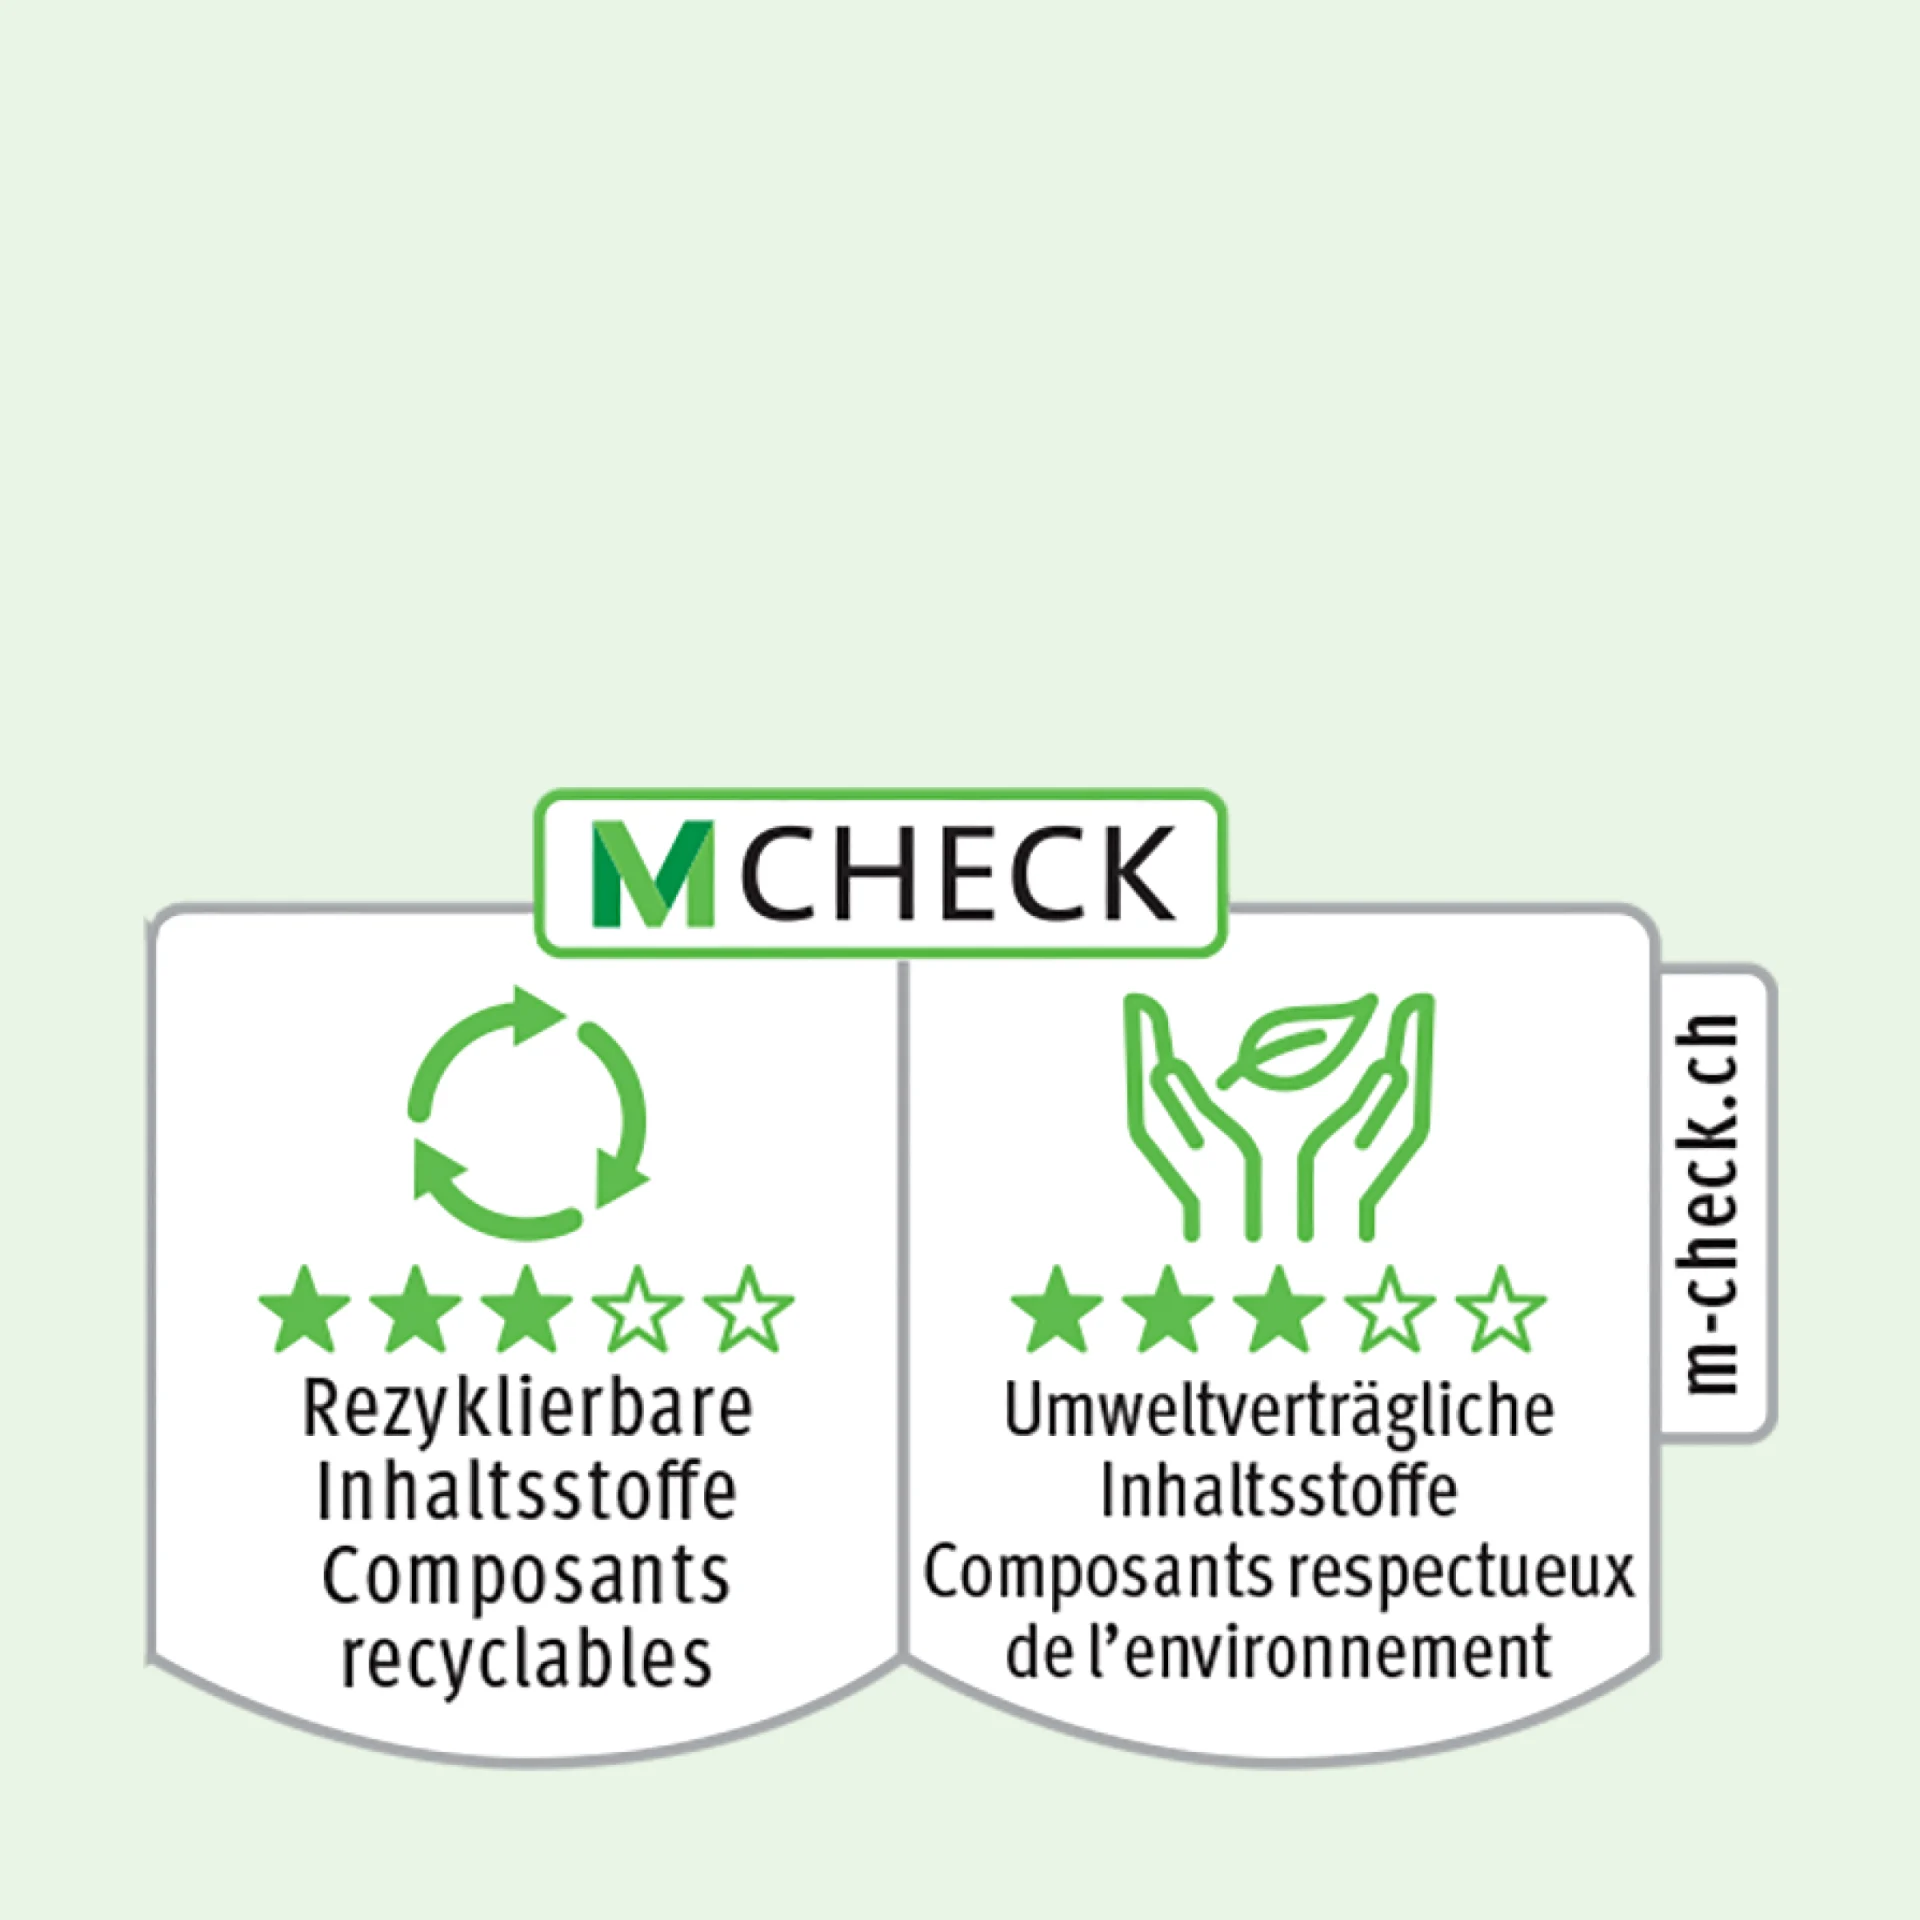 M-Check icon with a circle comprising three arrows and two hands holding a leaf, plus three stars for recyclable constituent materials and environmentally friendly packaging.